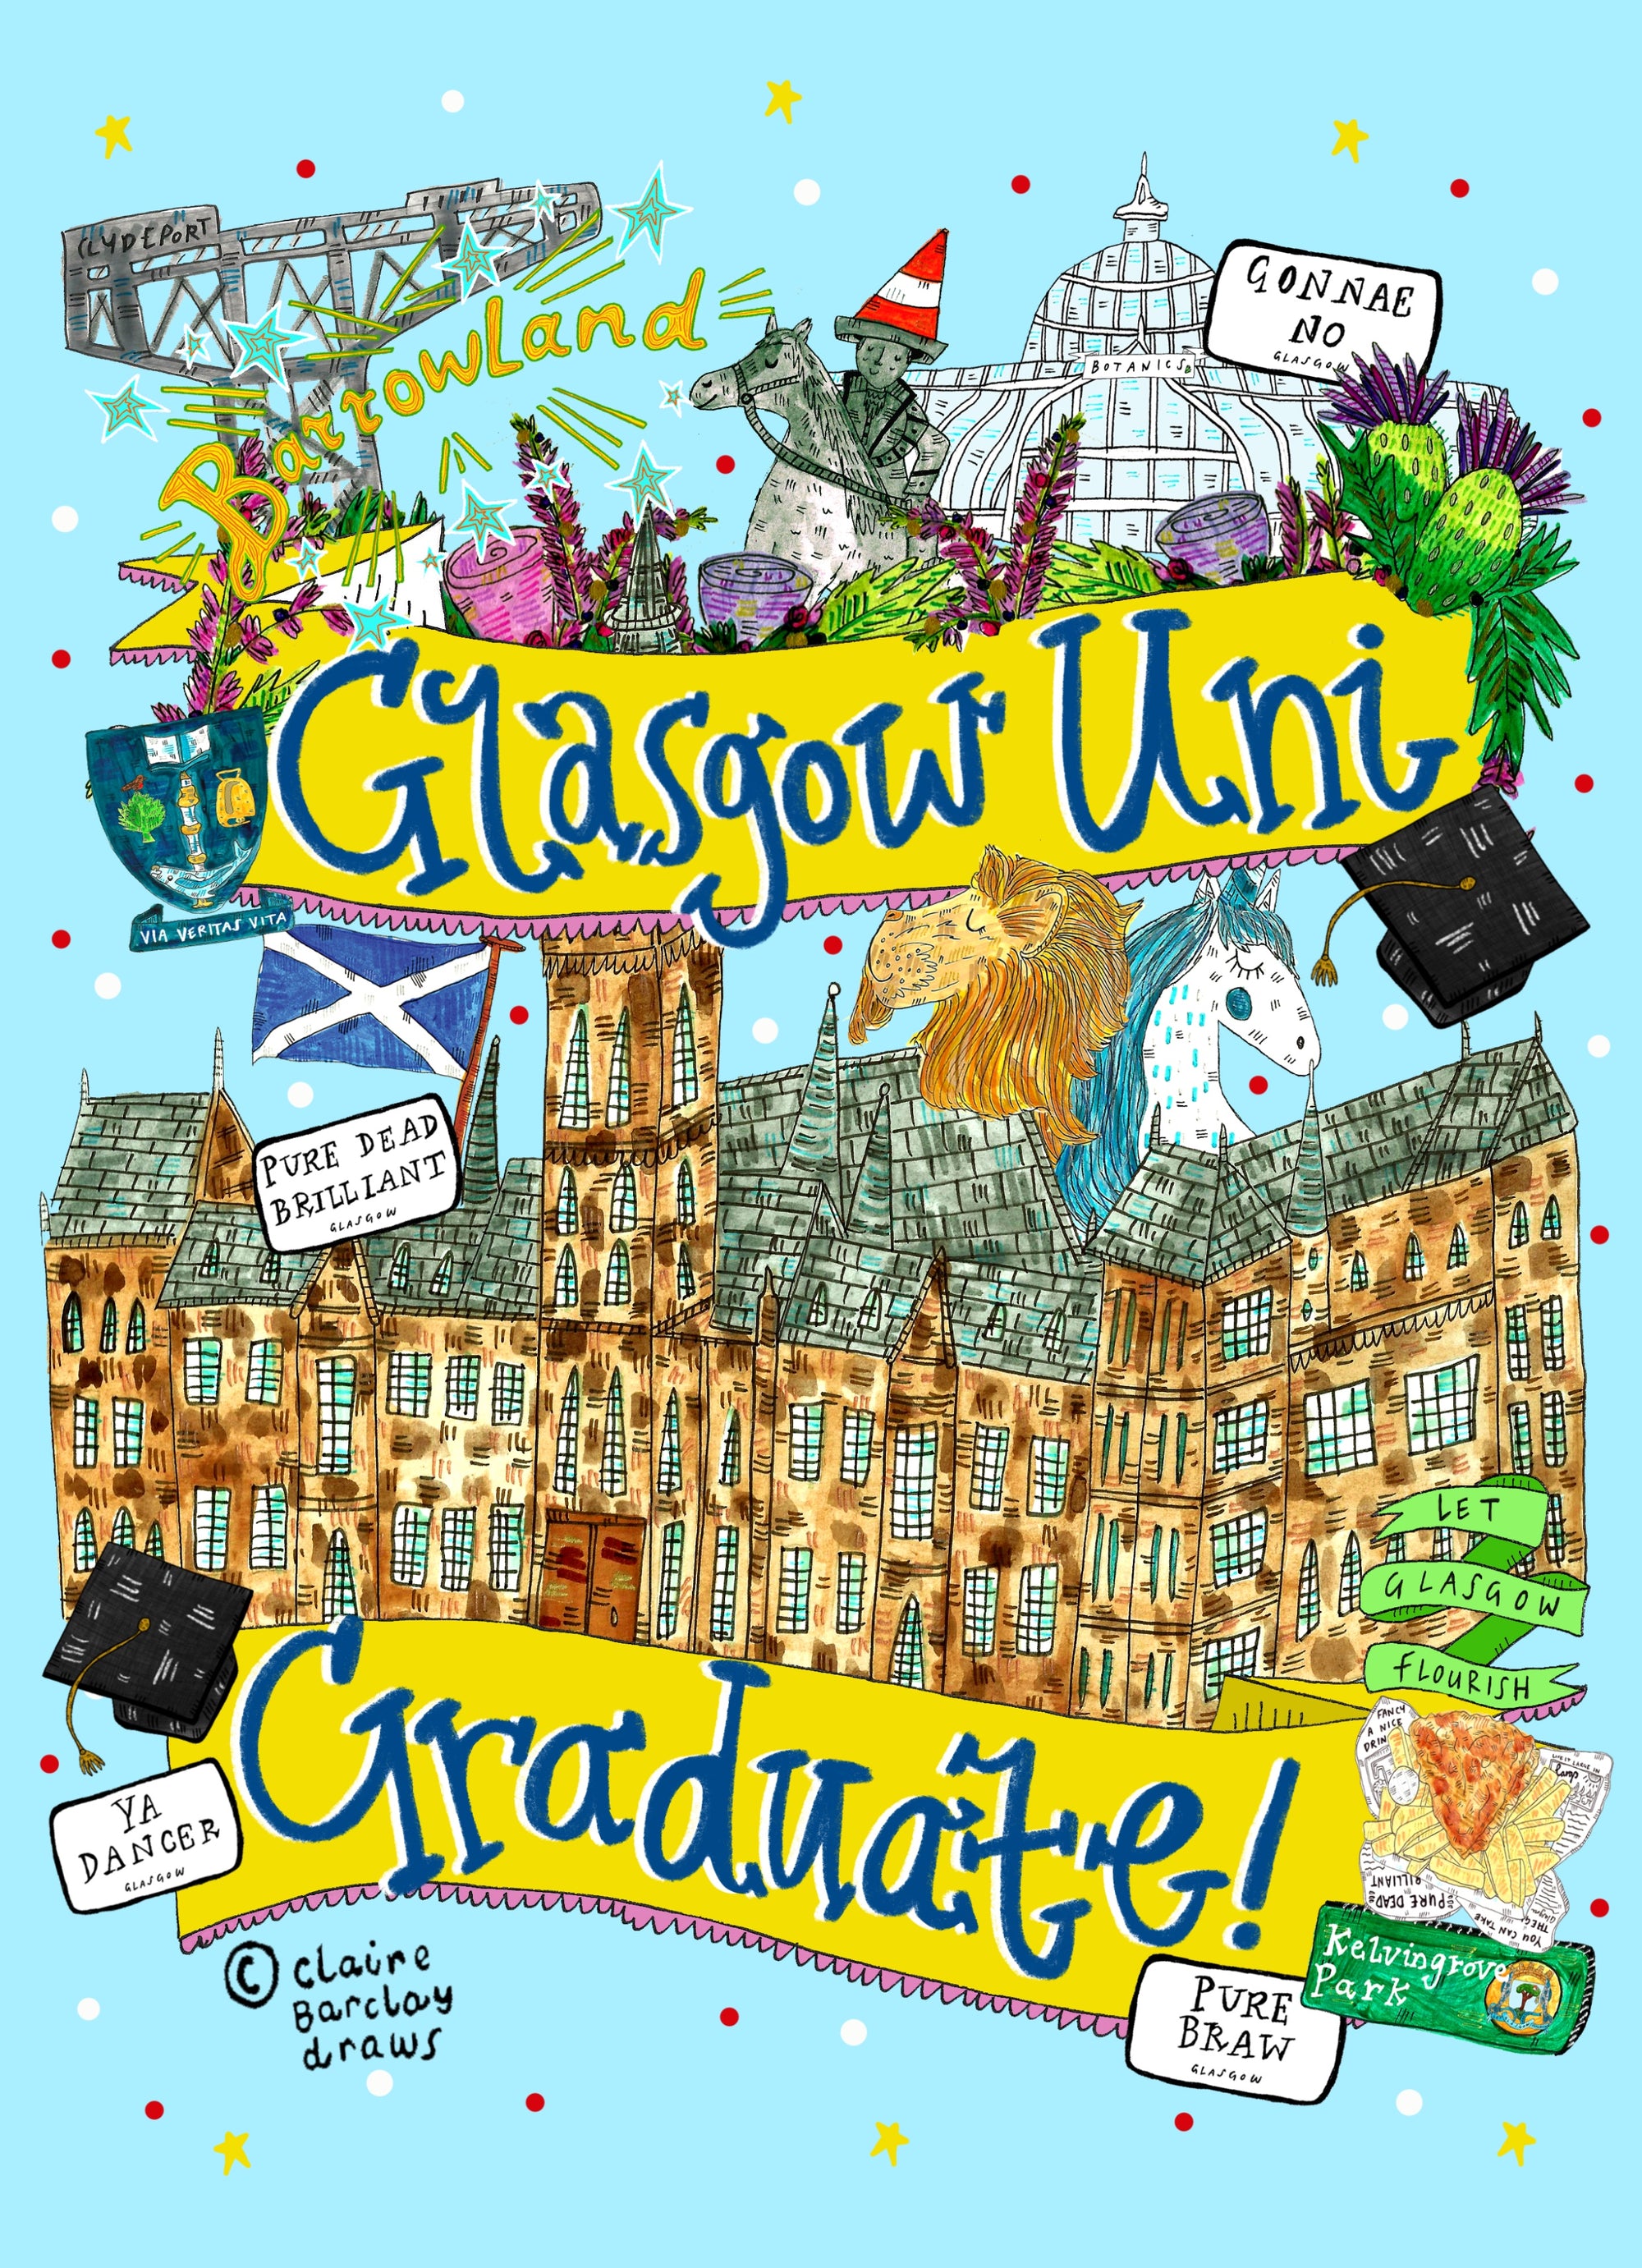 A greetings card with a light blue background with 2 large yellow banners with the words 'Glasgow Uni Graduate!'. There are lots of illustrations of Glasgow including Glasgow University, The Finnieston Crane, Glasgow Botanic Gardens, The Wellington Statue and other Scottish famous icons.